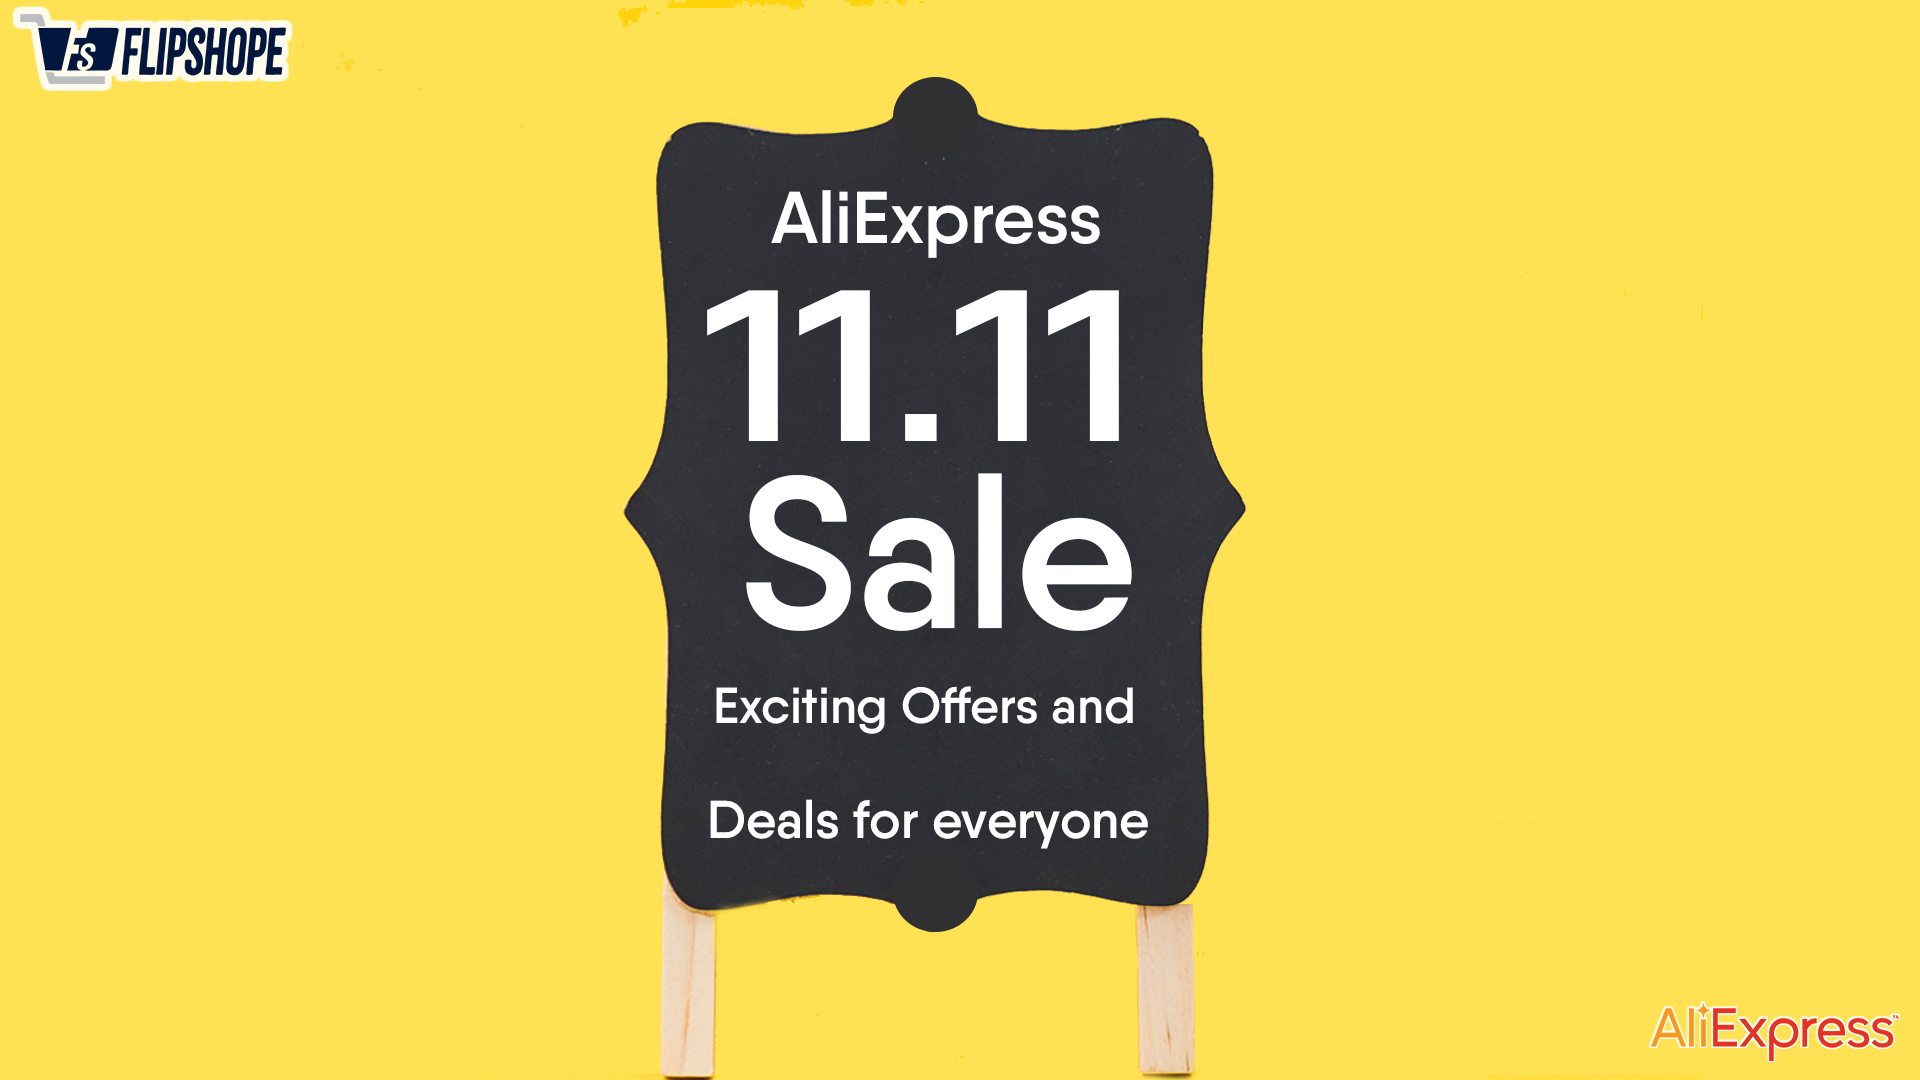 Ali Express 11.11 Sale Offers, Deals and more